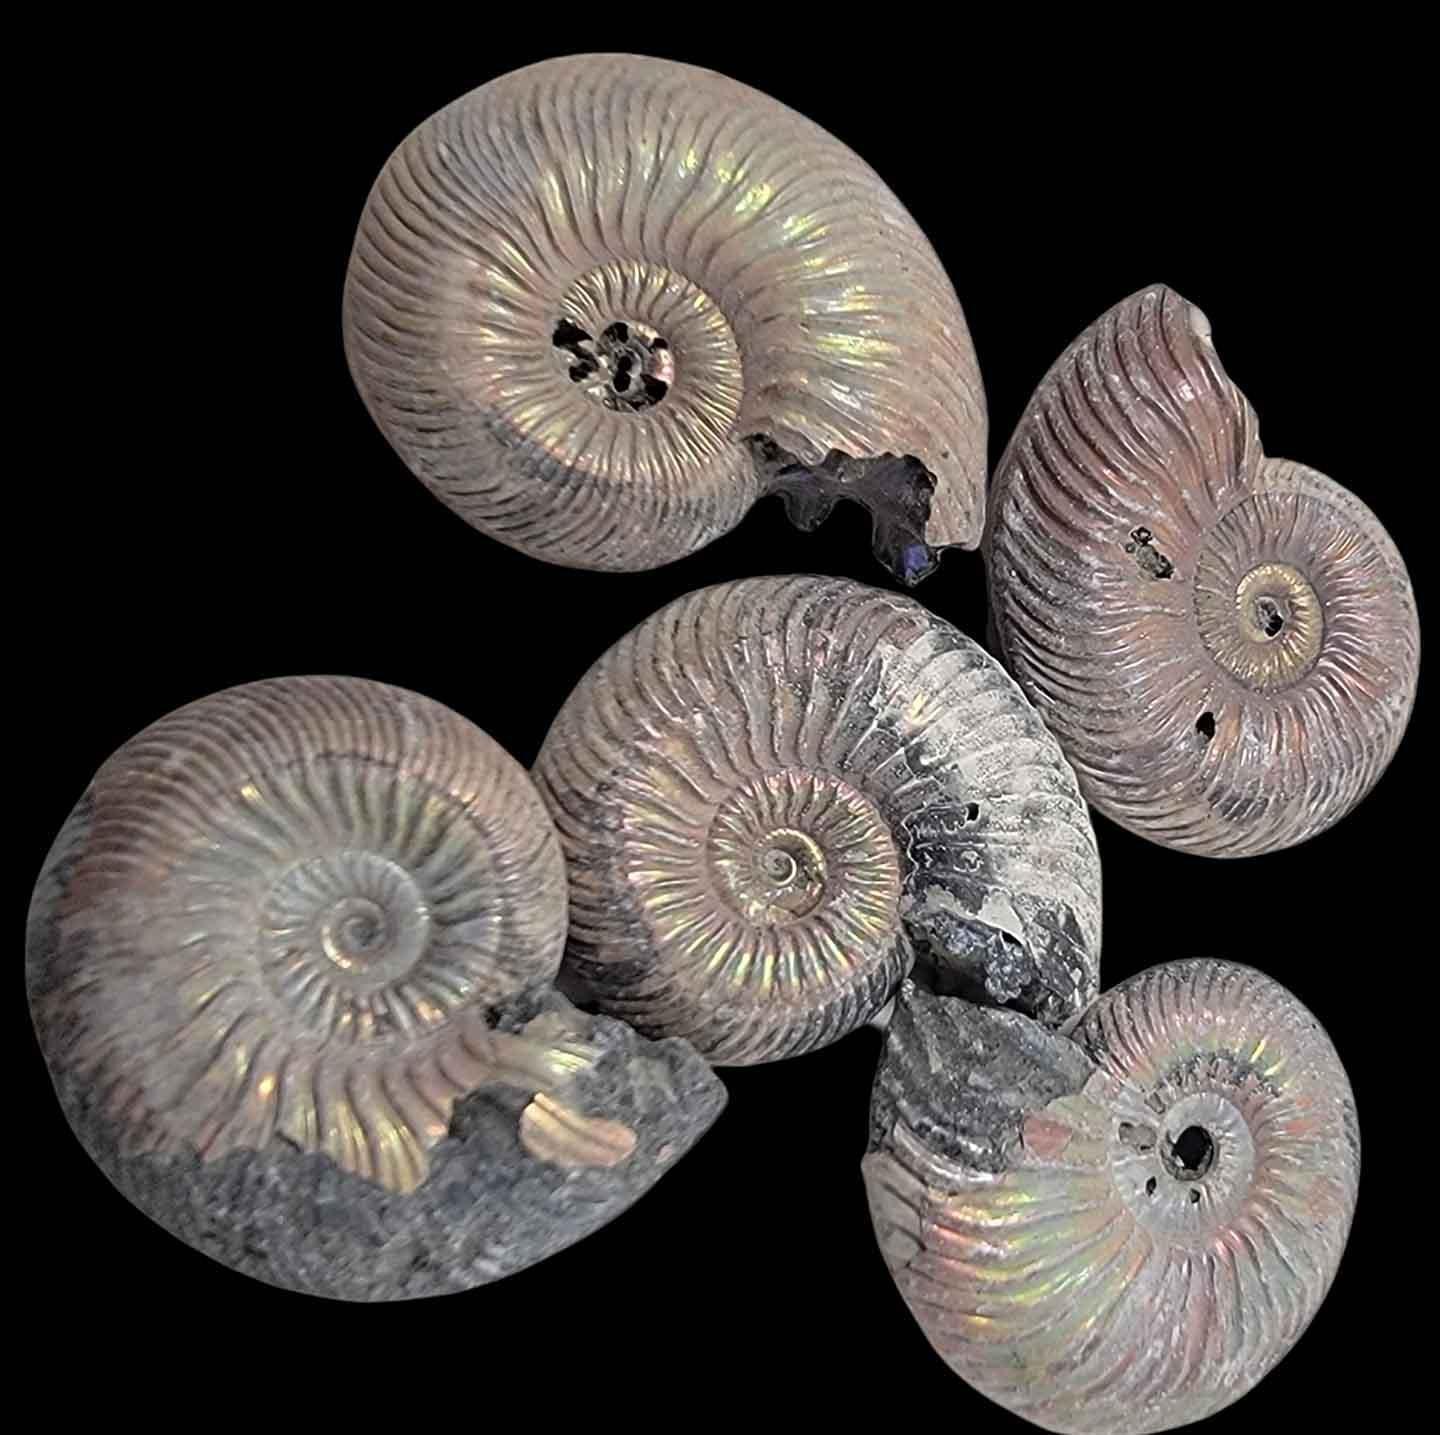 Pyritized Ammonite Fossil!  Jurassic Period Fossil! - LapidaryCentral